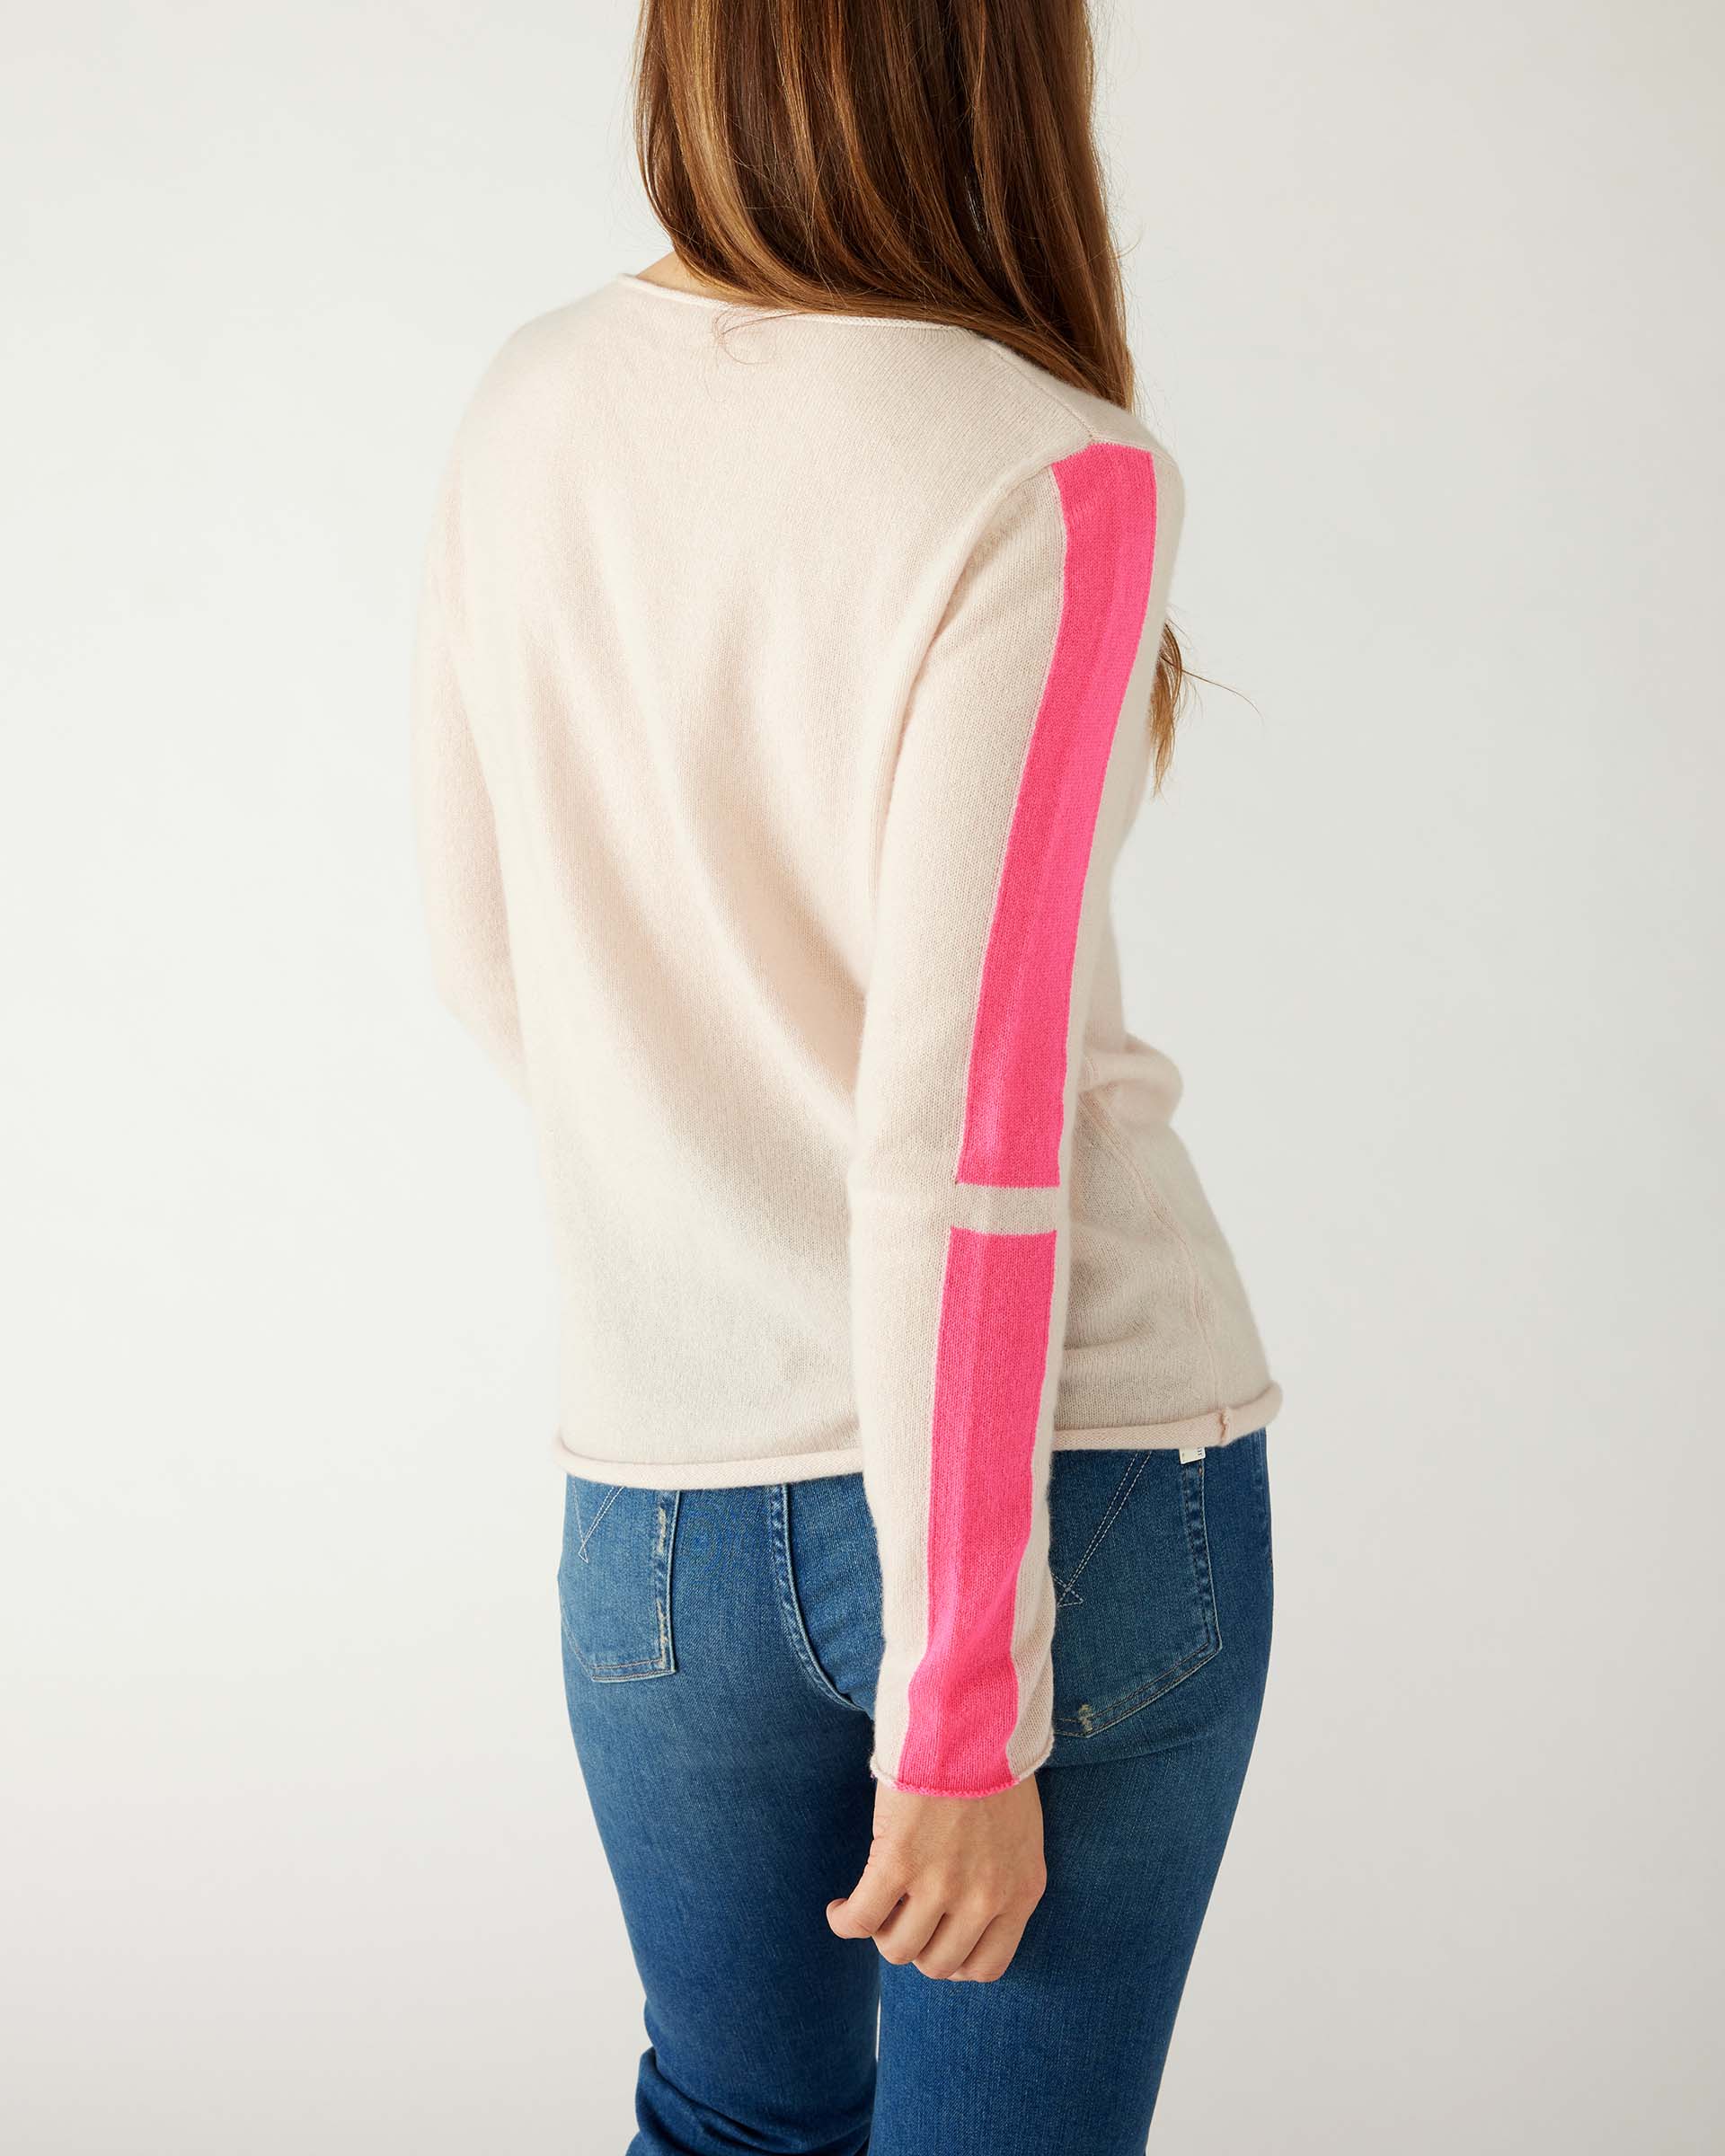 rear view of woman wearing mersea carmel cashmere sweater in champagne color with hot pink stripes down sleaves